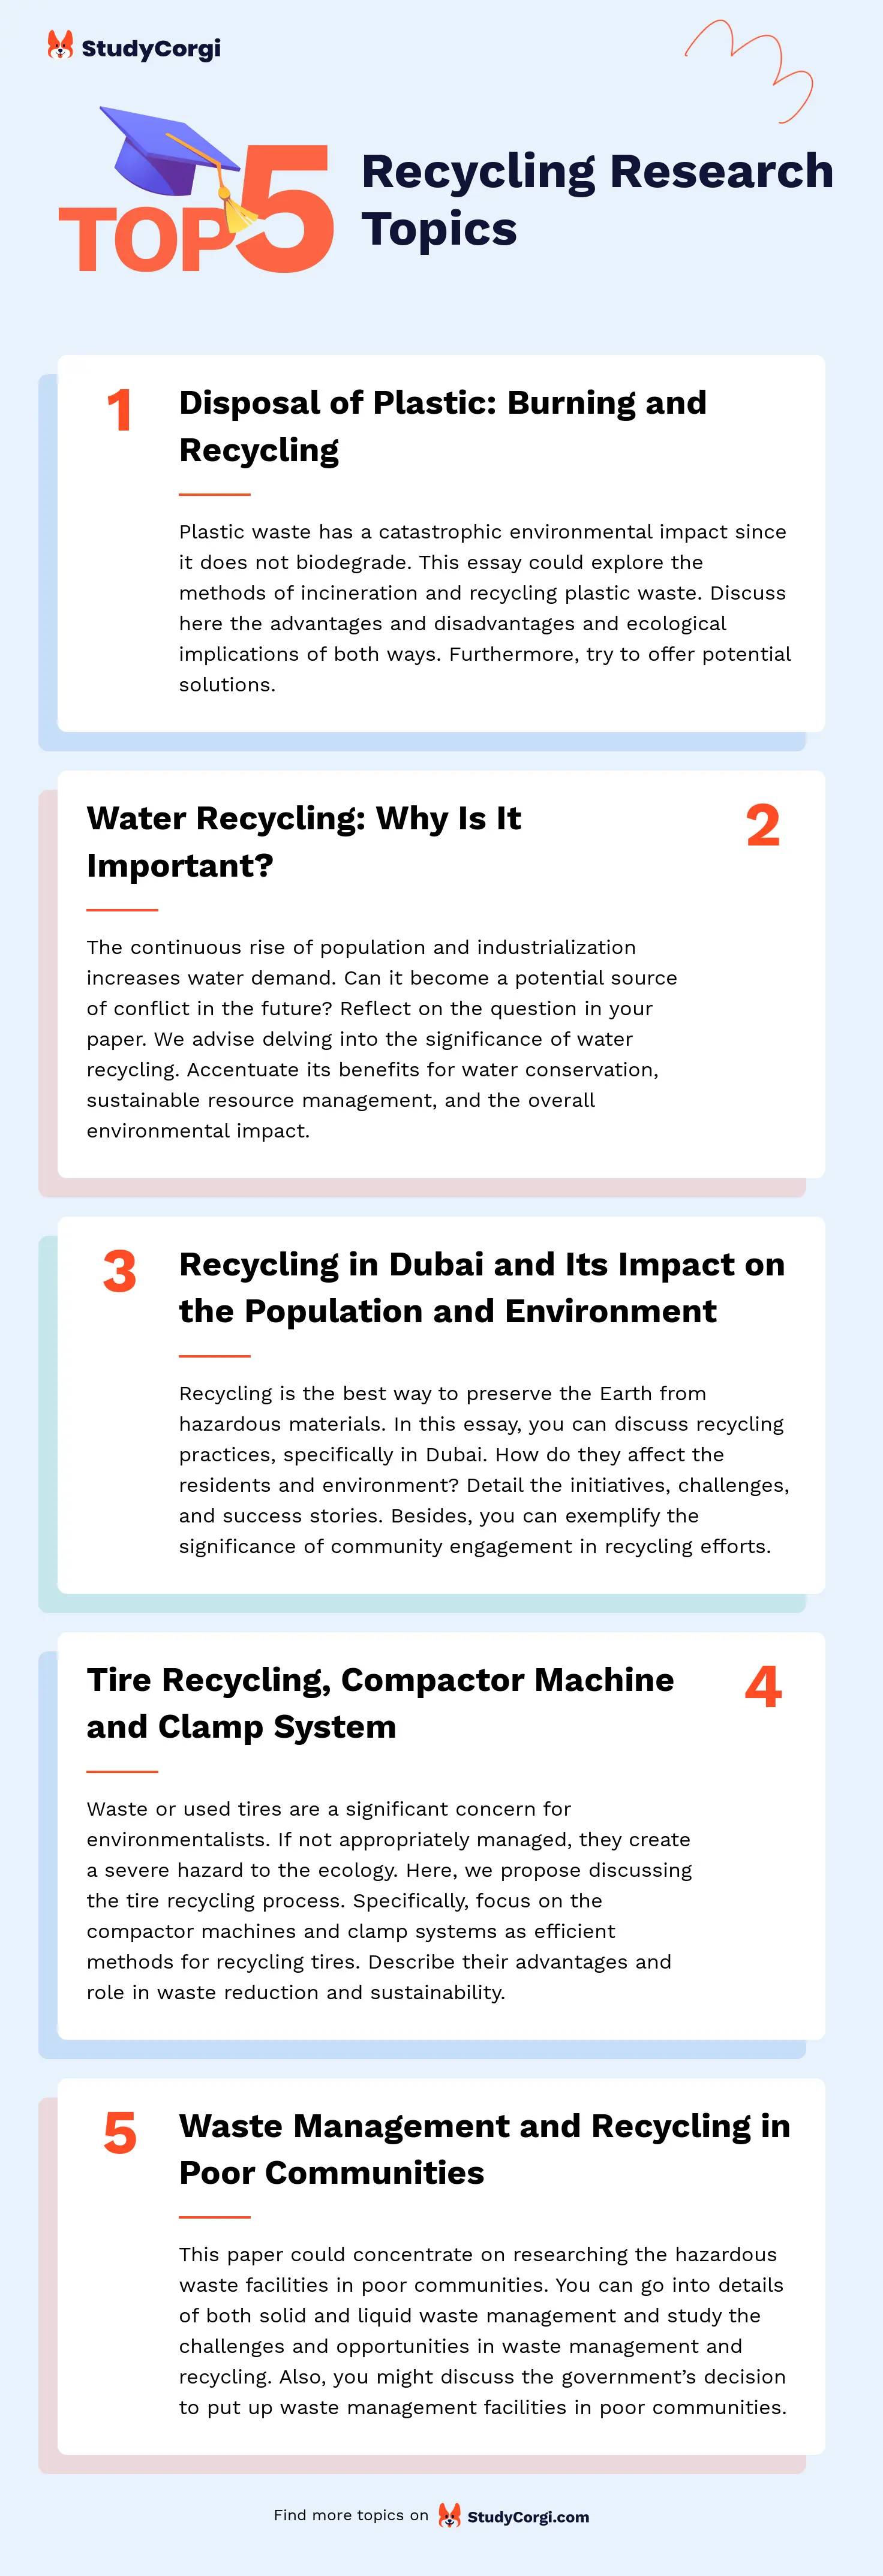 TOP-5 Recycling Research Topics